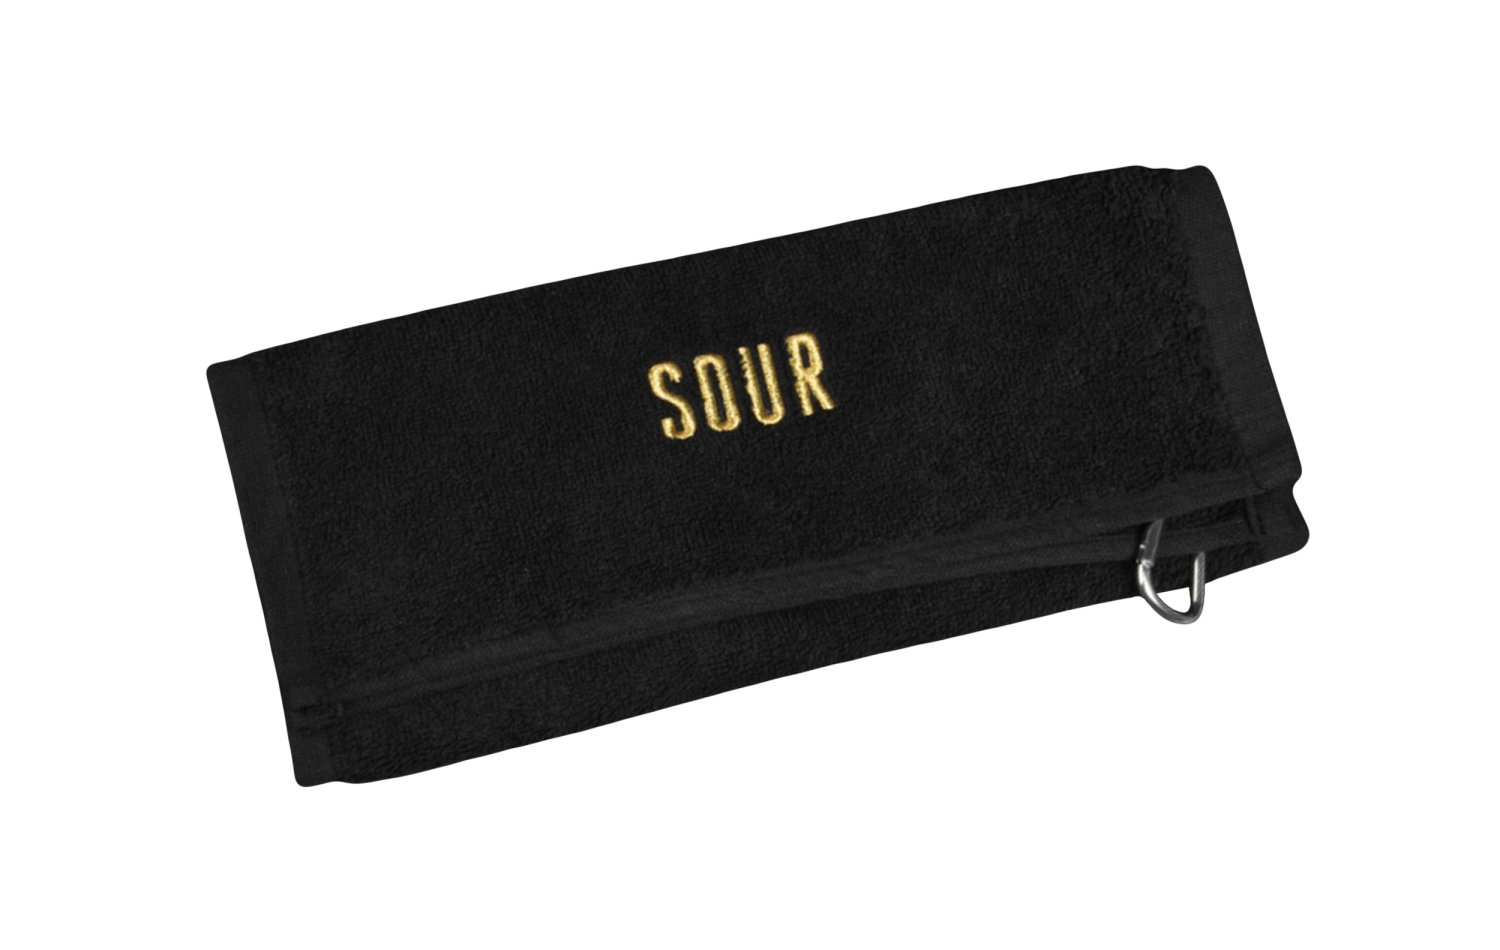 Sour Gold Embroidered Golf Towel ()